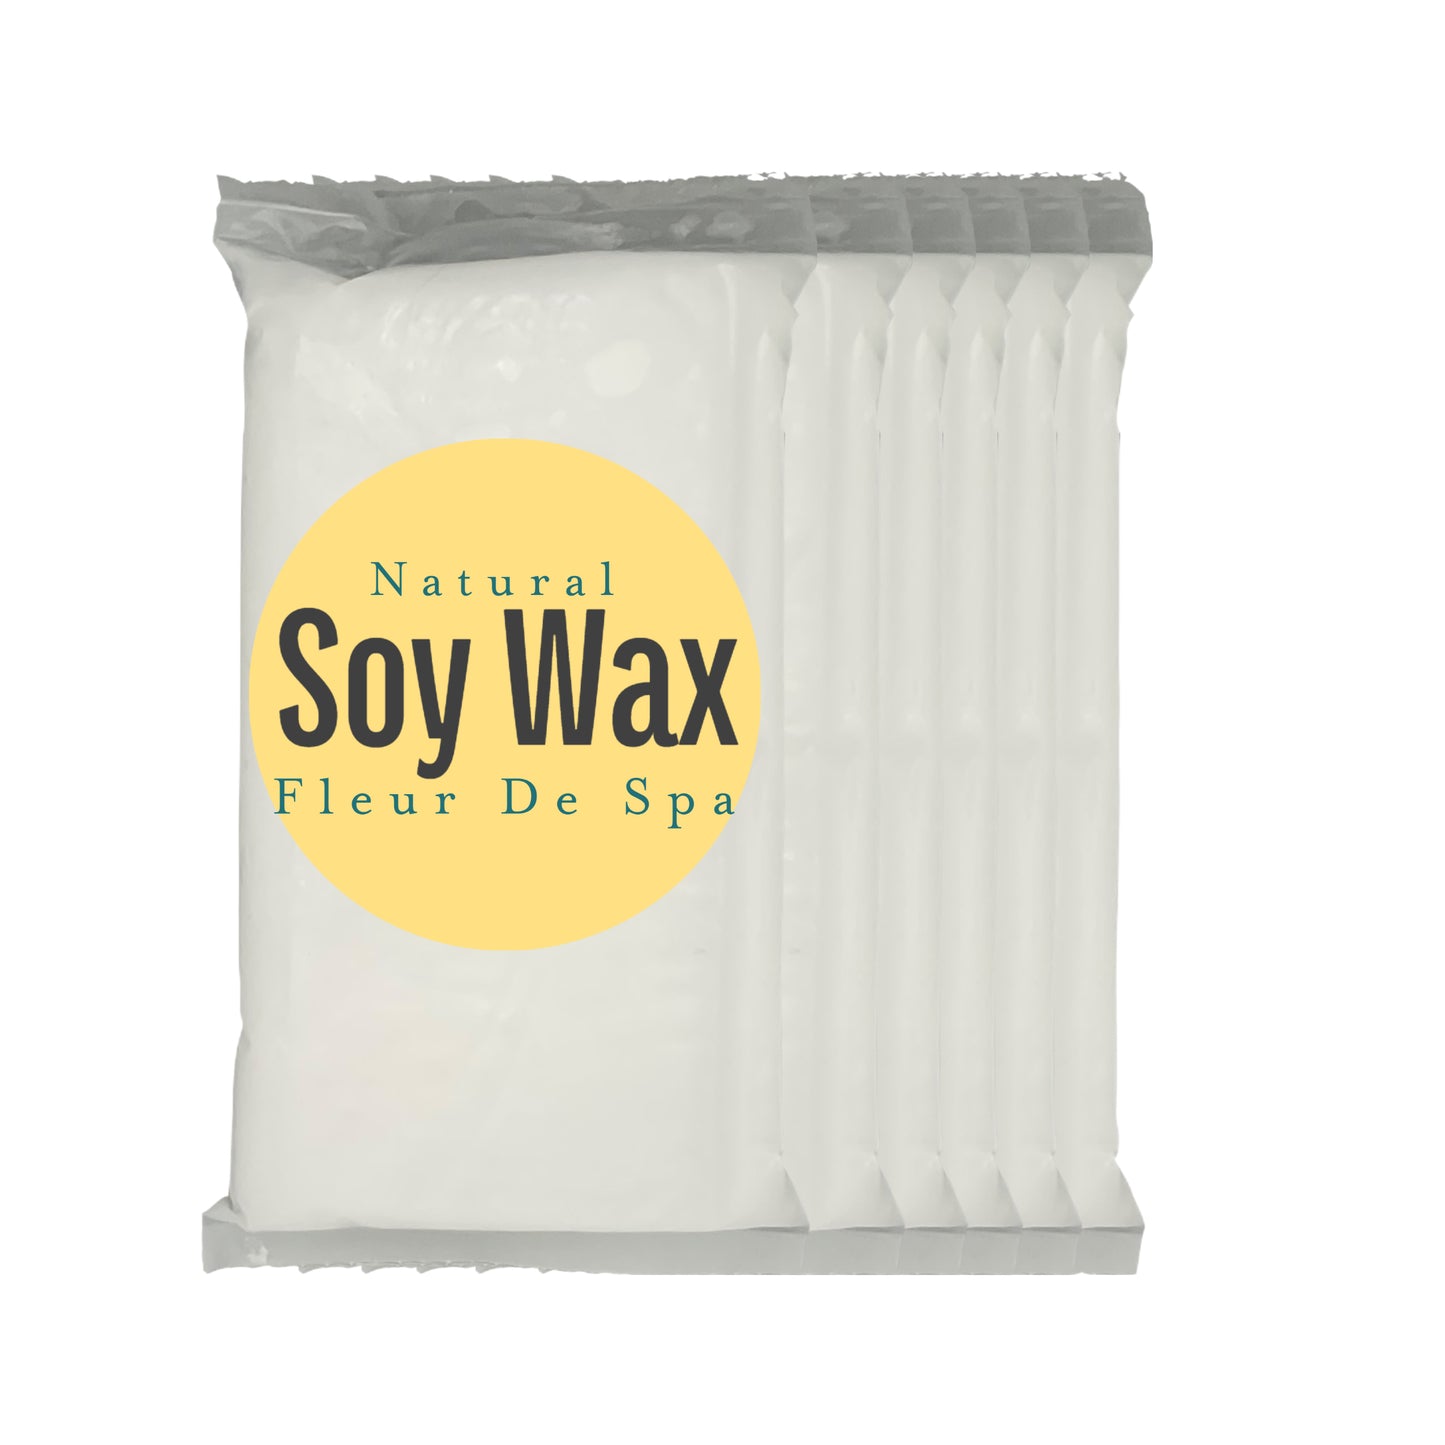 Fleur De Spa Soy Wax for Candle Making - Packaged in 1lb Bars - Natural Soy Wax Made in USA